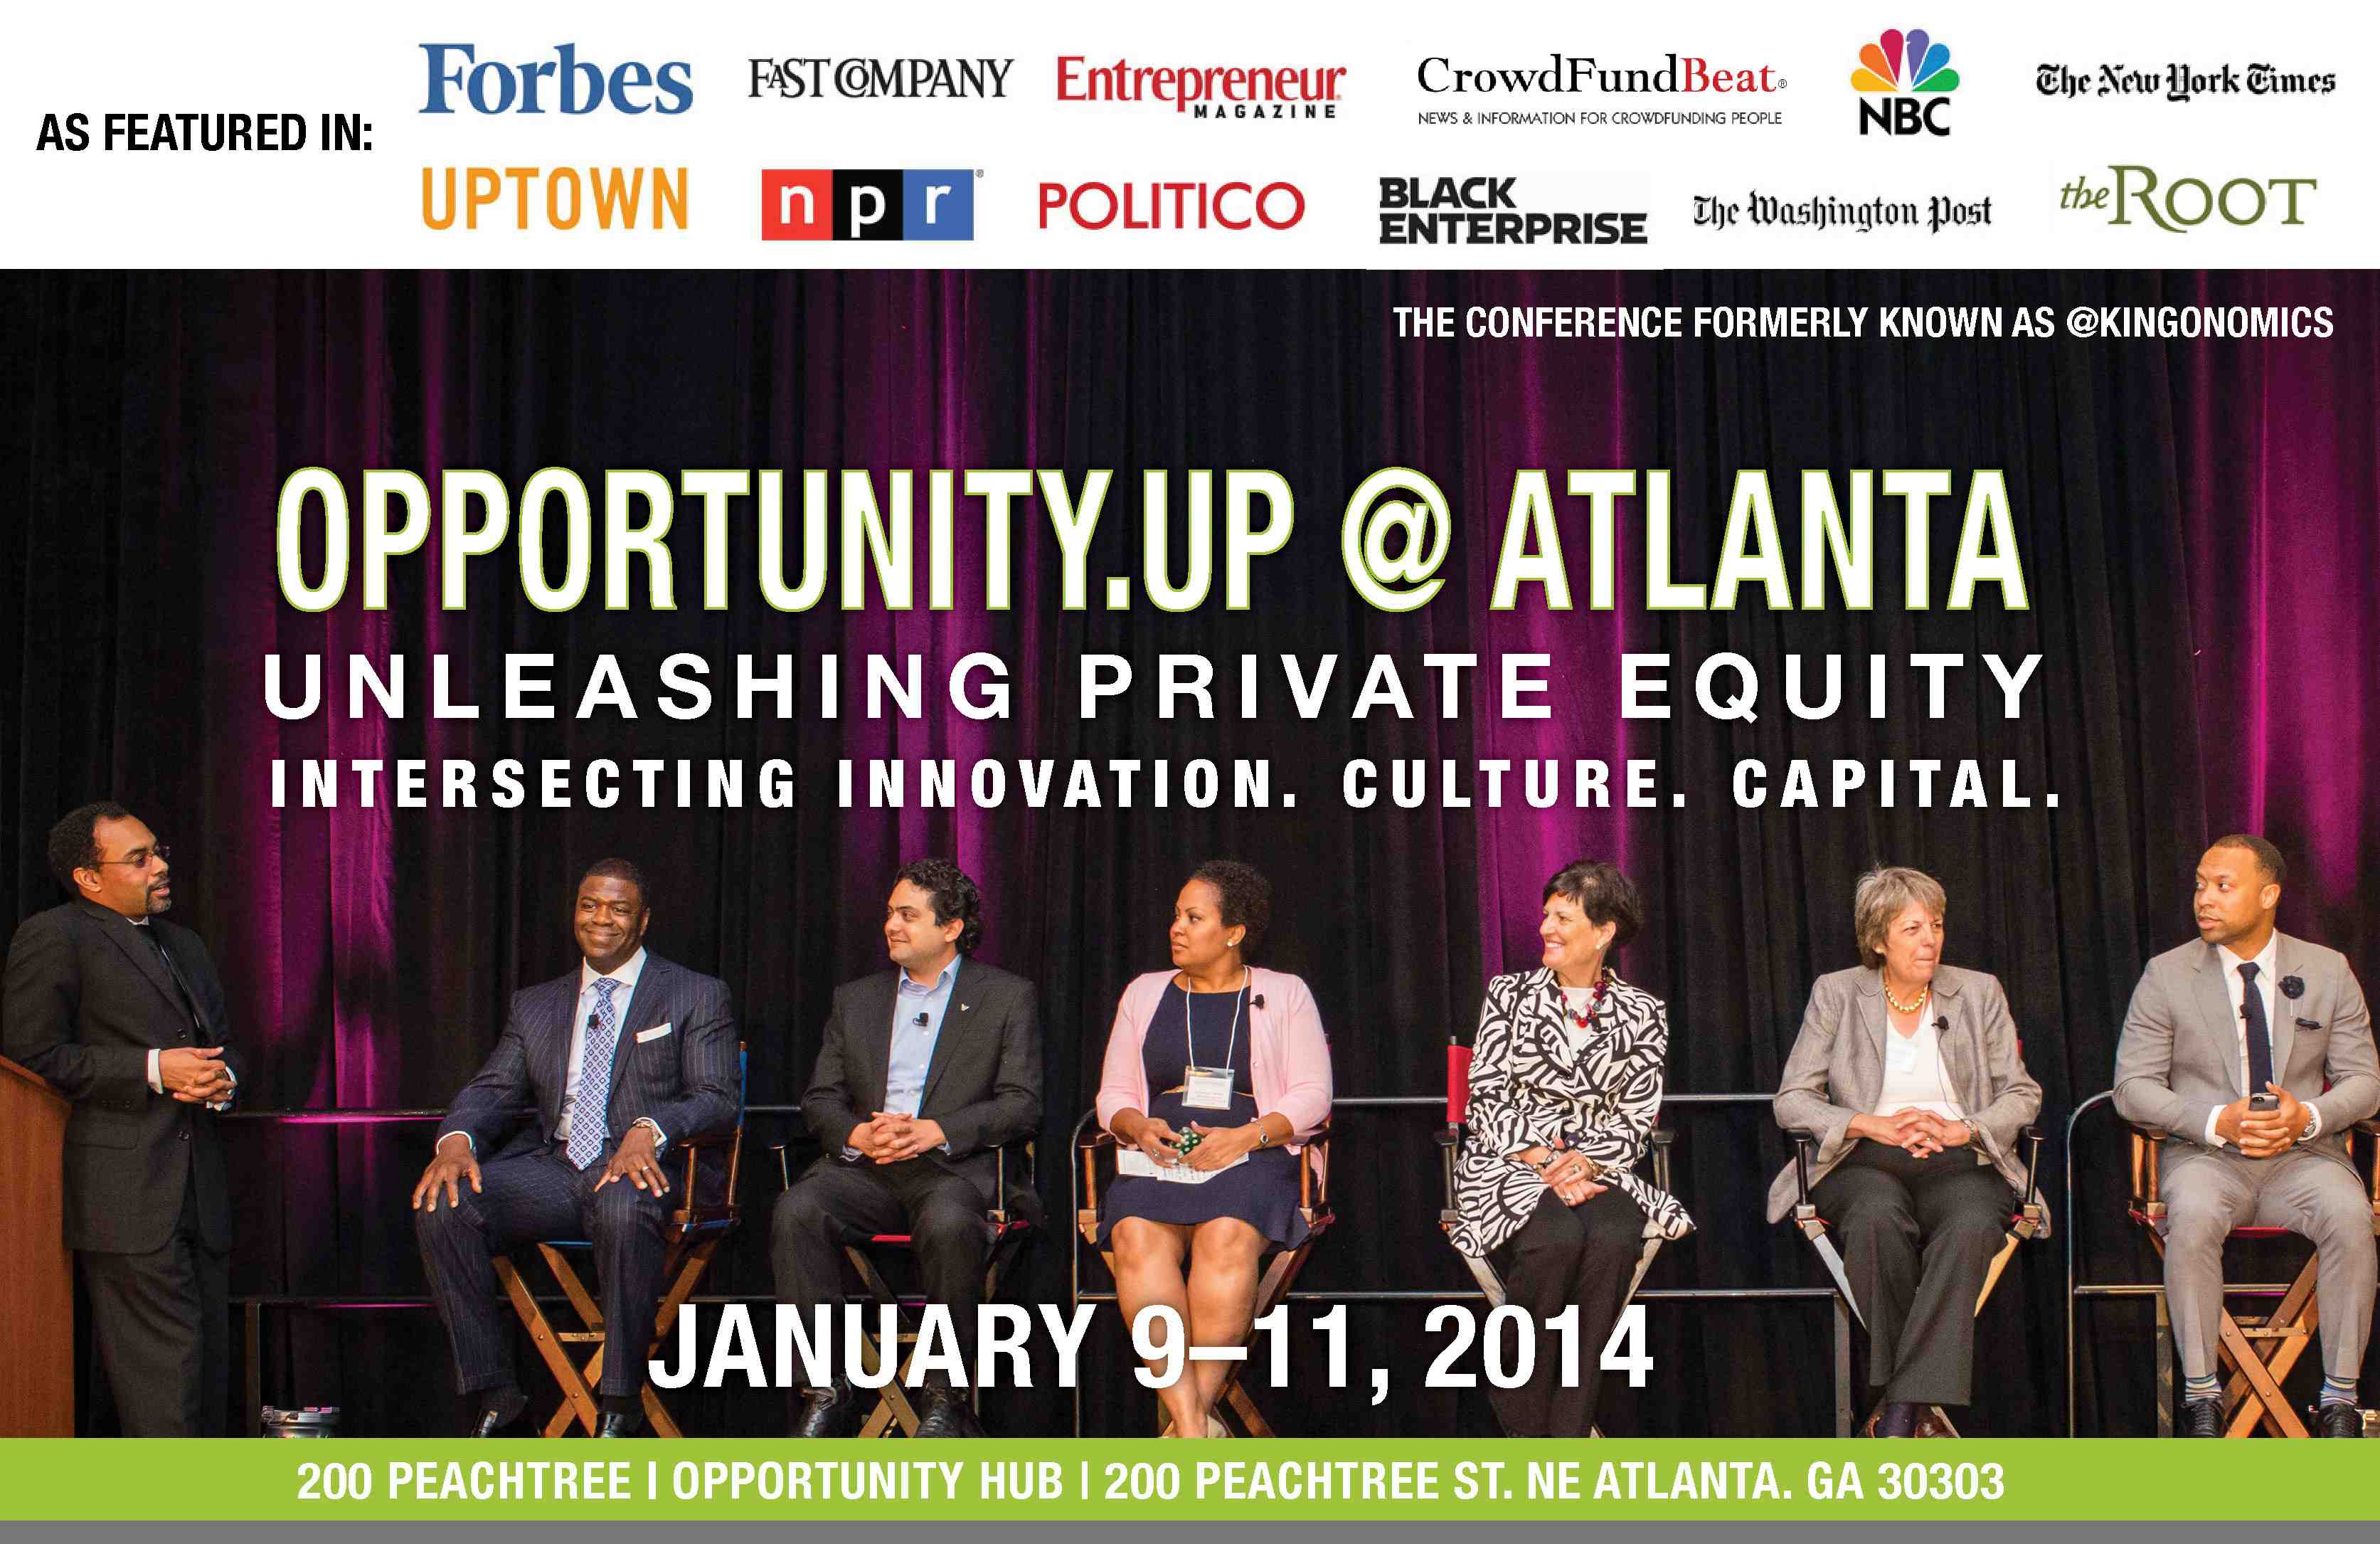 opportunity.UP // unleashing private equity conference // atlanta